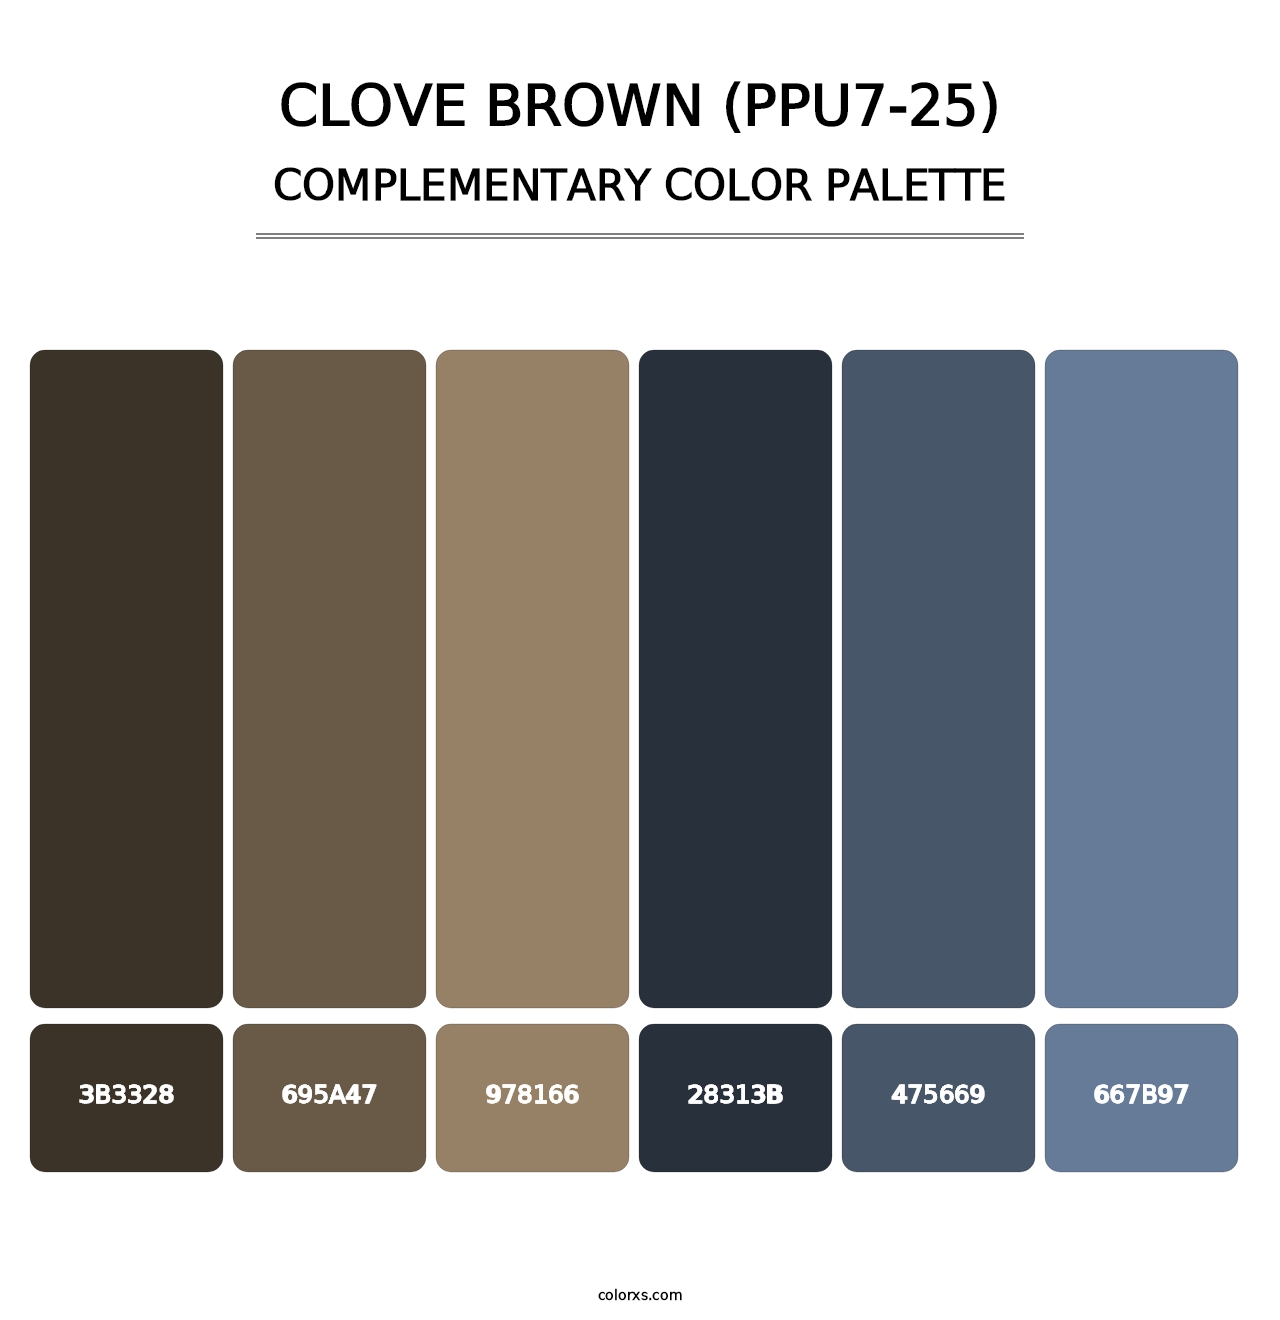 Clove Brown (PPU7-25) - Complementary Color Palette